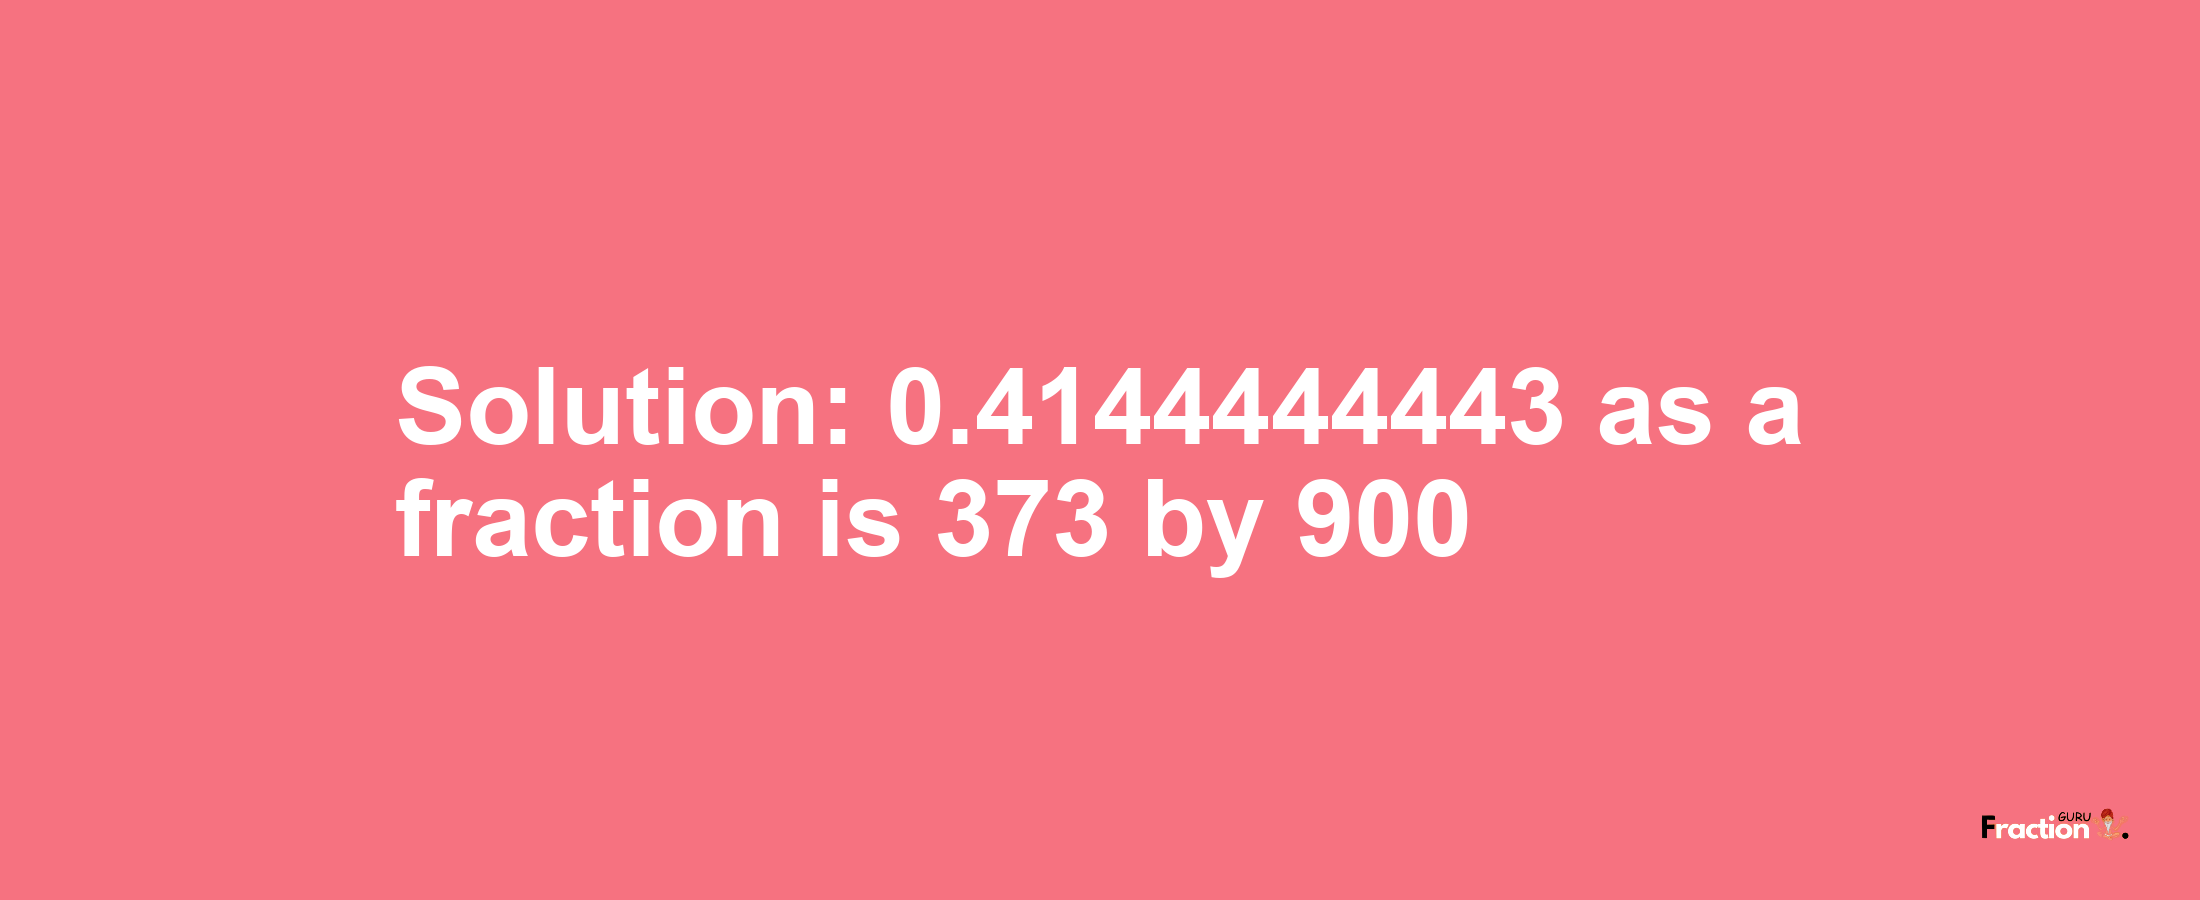 Solution:0.4144444443 as a fraction is 373/900